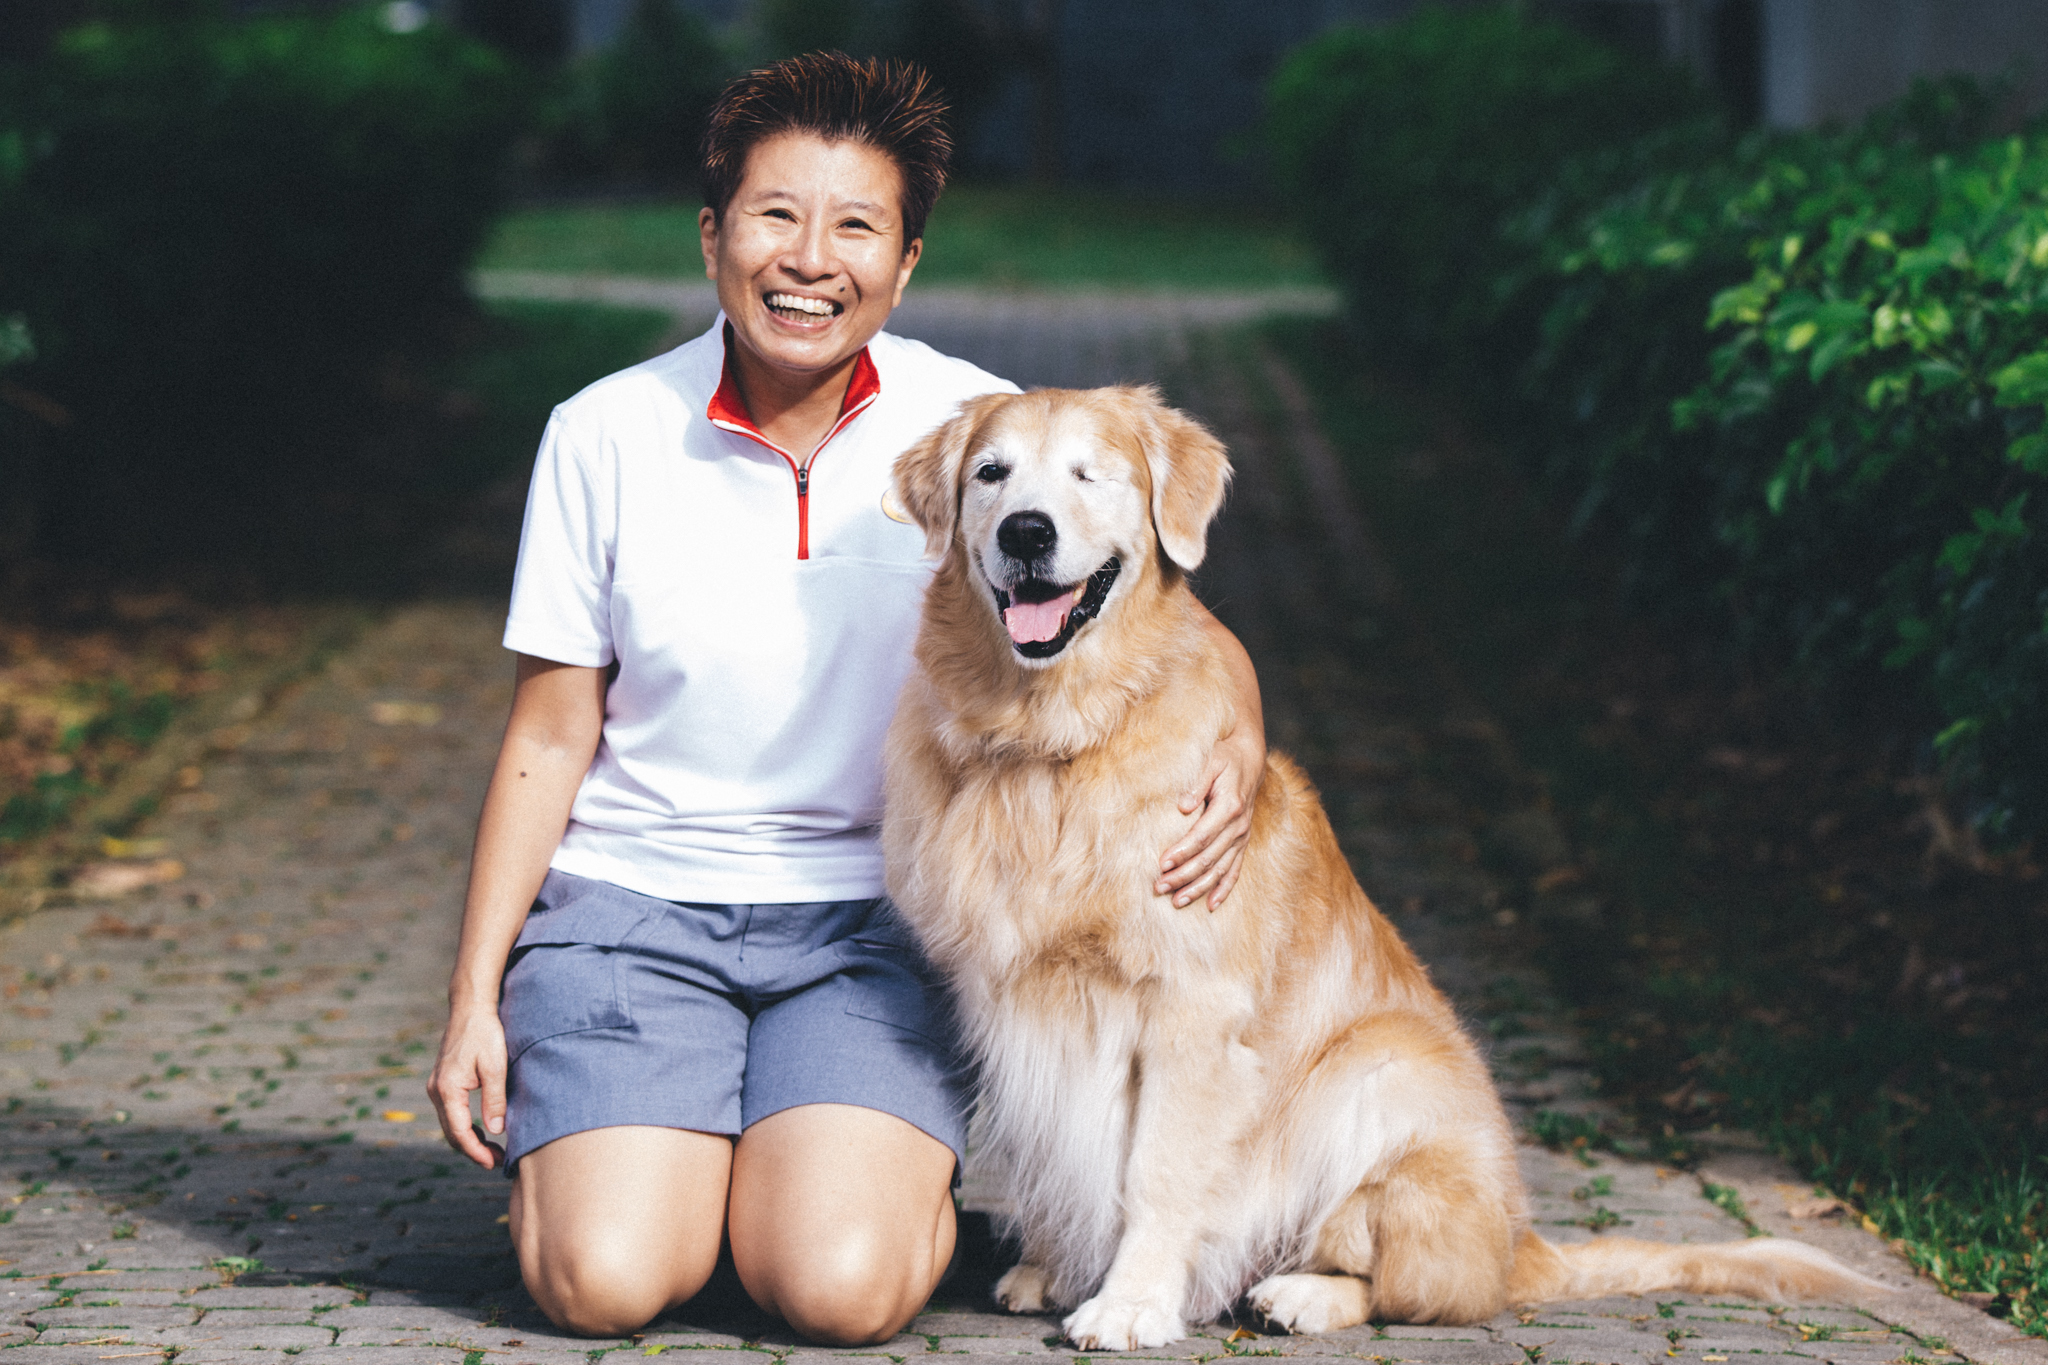 Certified Professional Dog Trainer, Certified Dog Behaviour Consultant, Kang Nee of cheerfuldogs.com